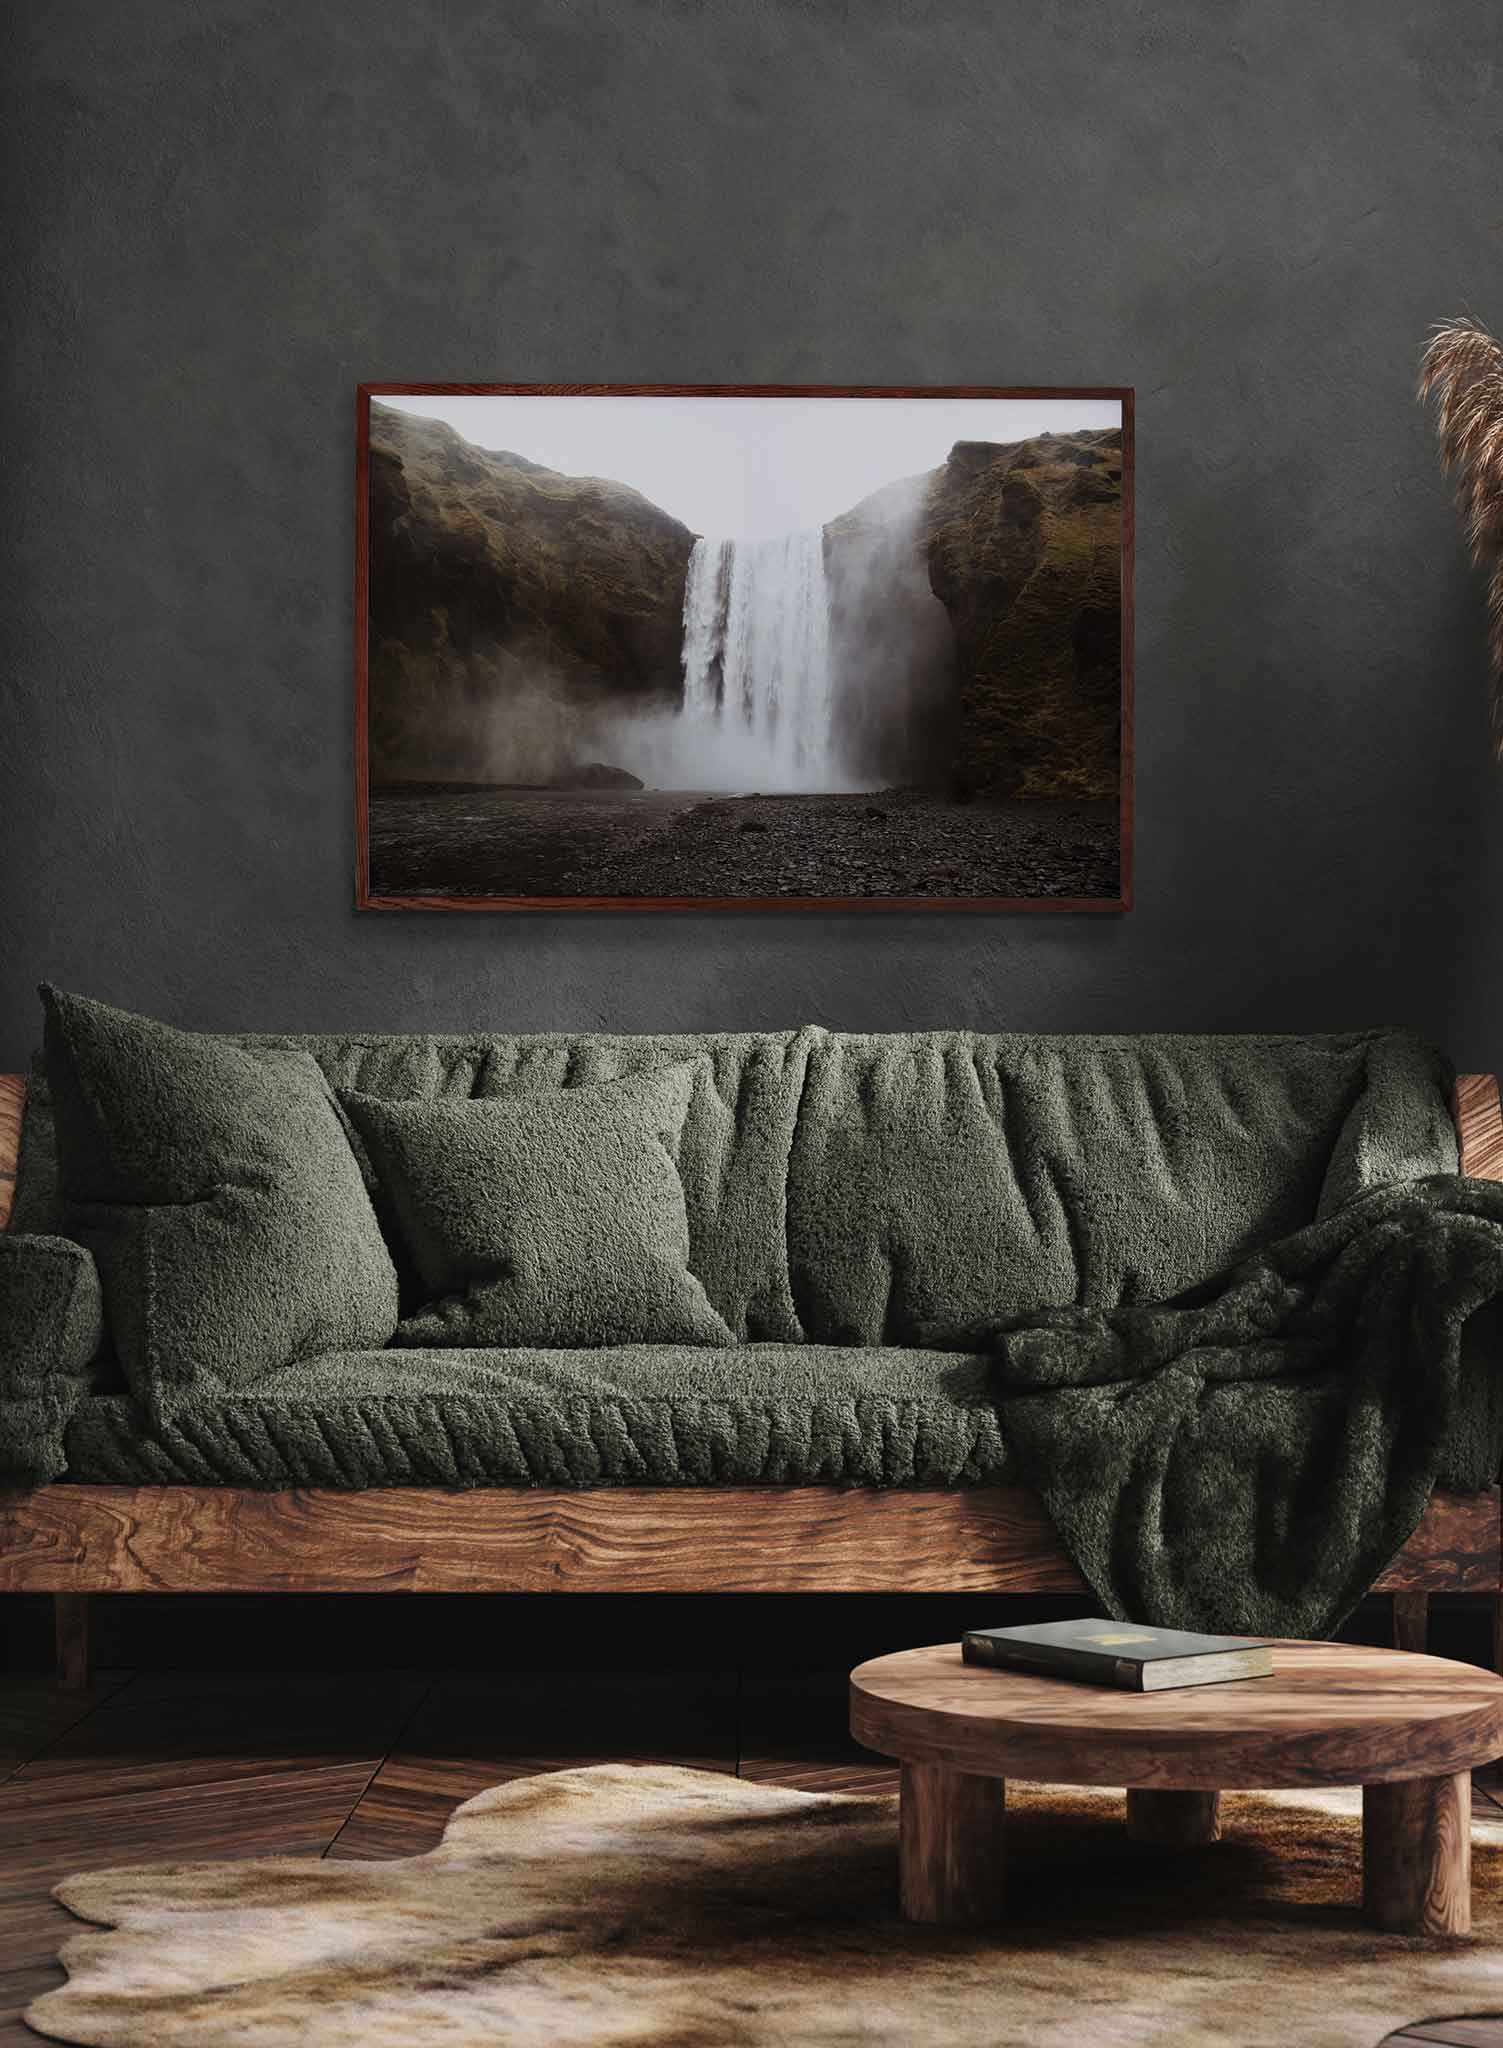 Cascading Scenery' is a landscape photography poster by Opposite Wall of beautiful waterfalls in Iceland.